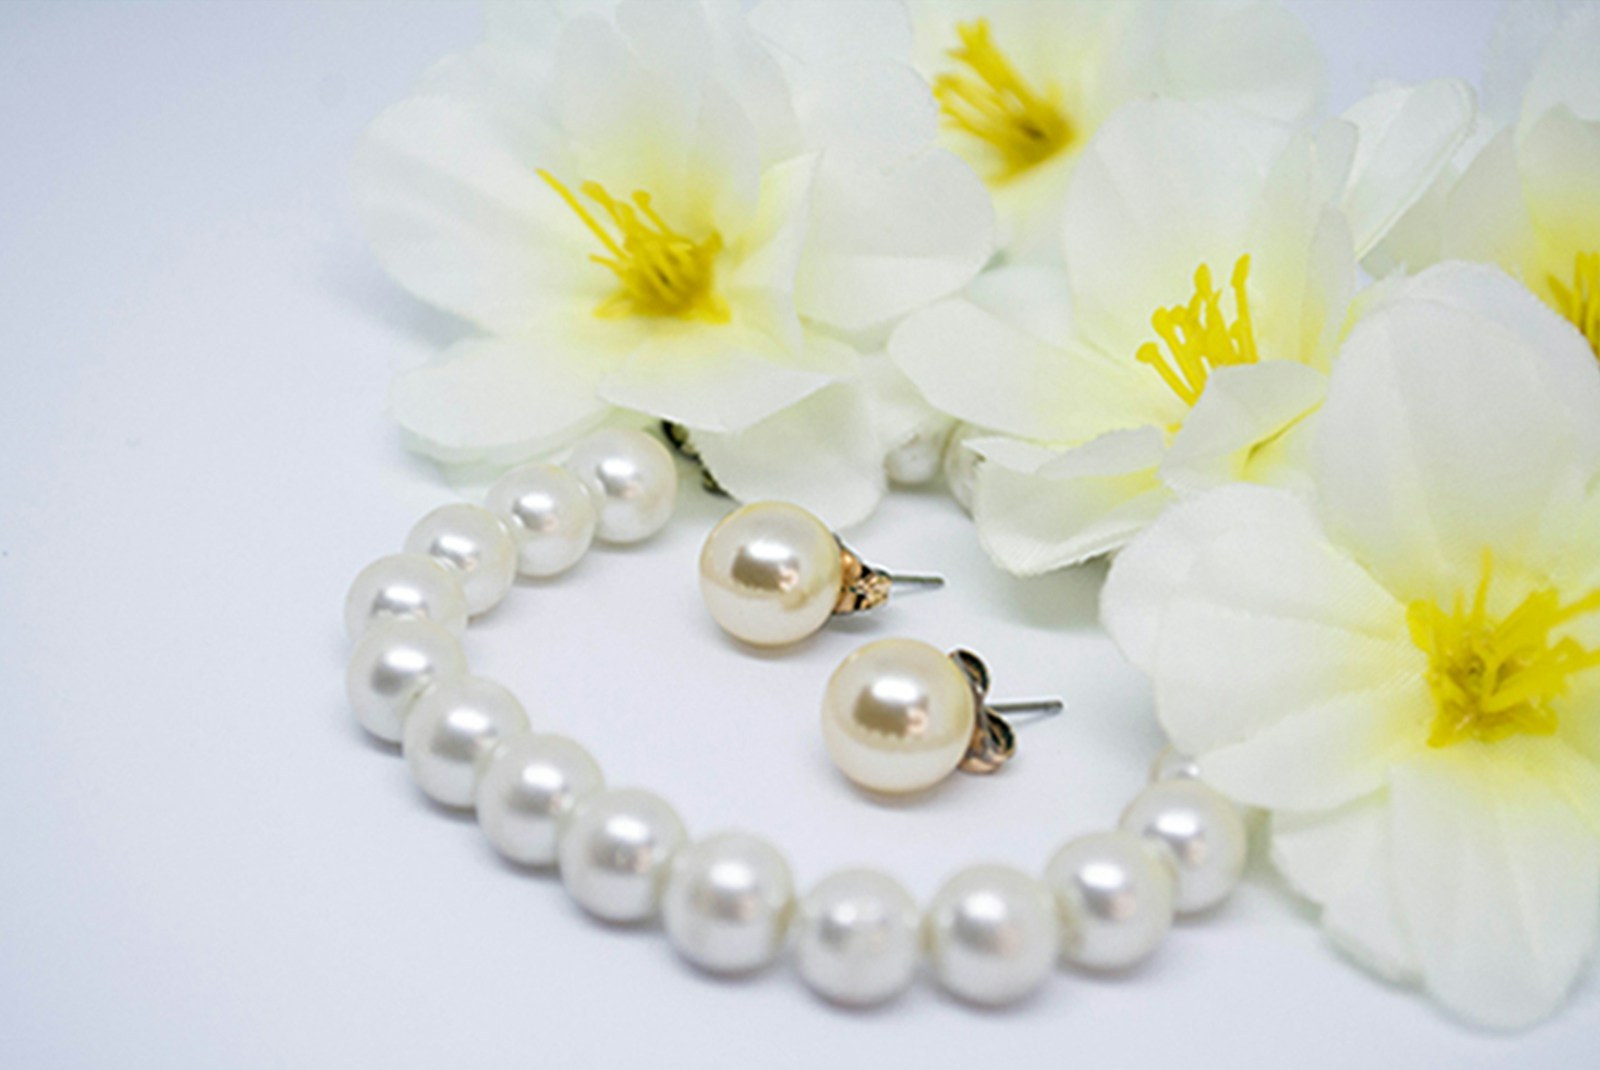 a pair of pearls and a flower on a white surface